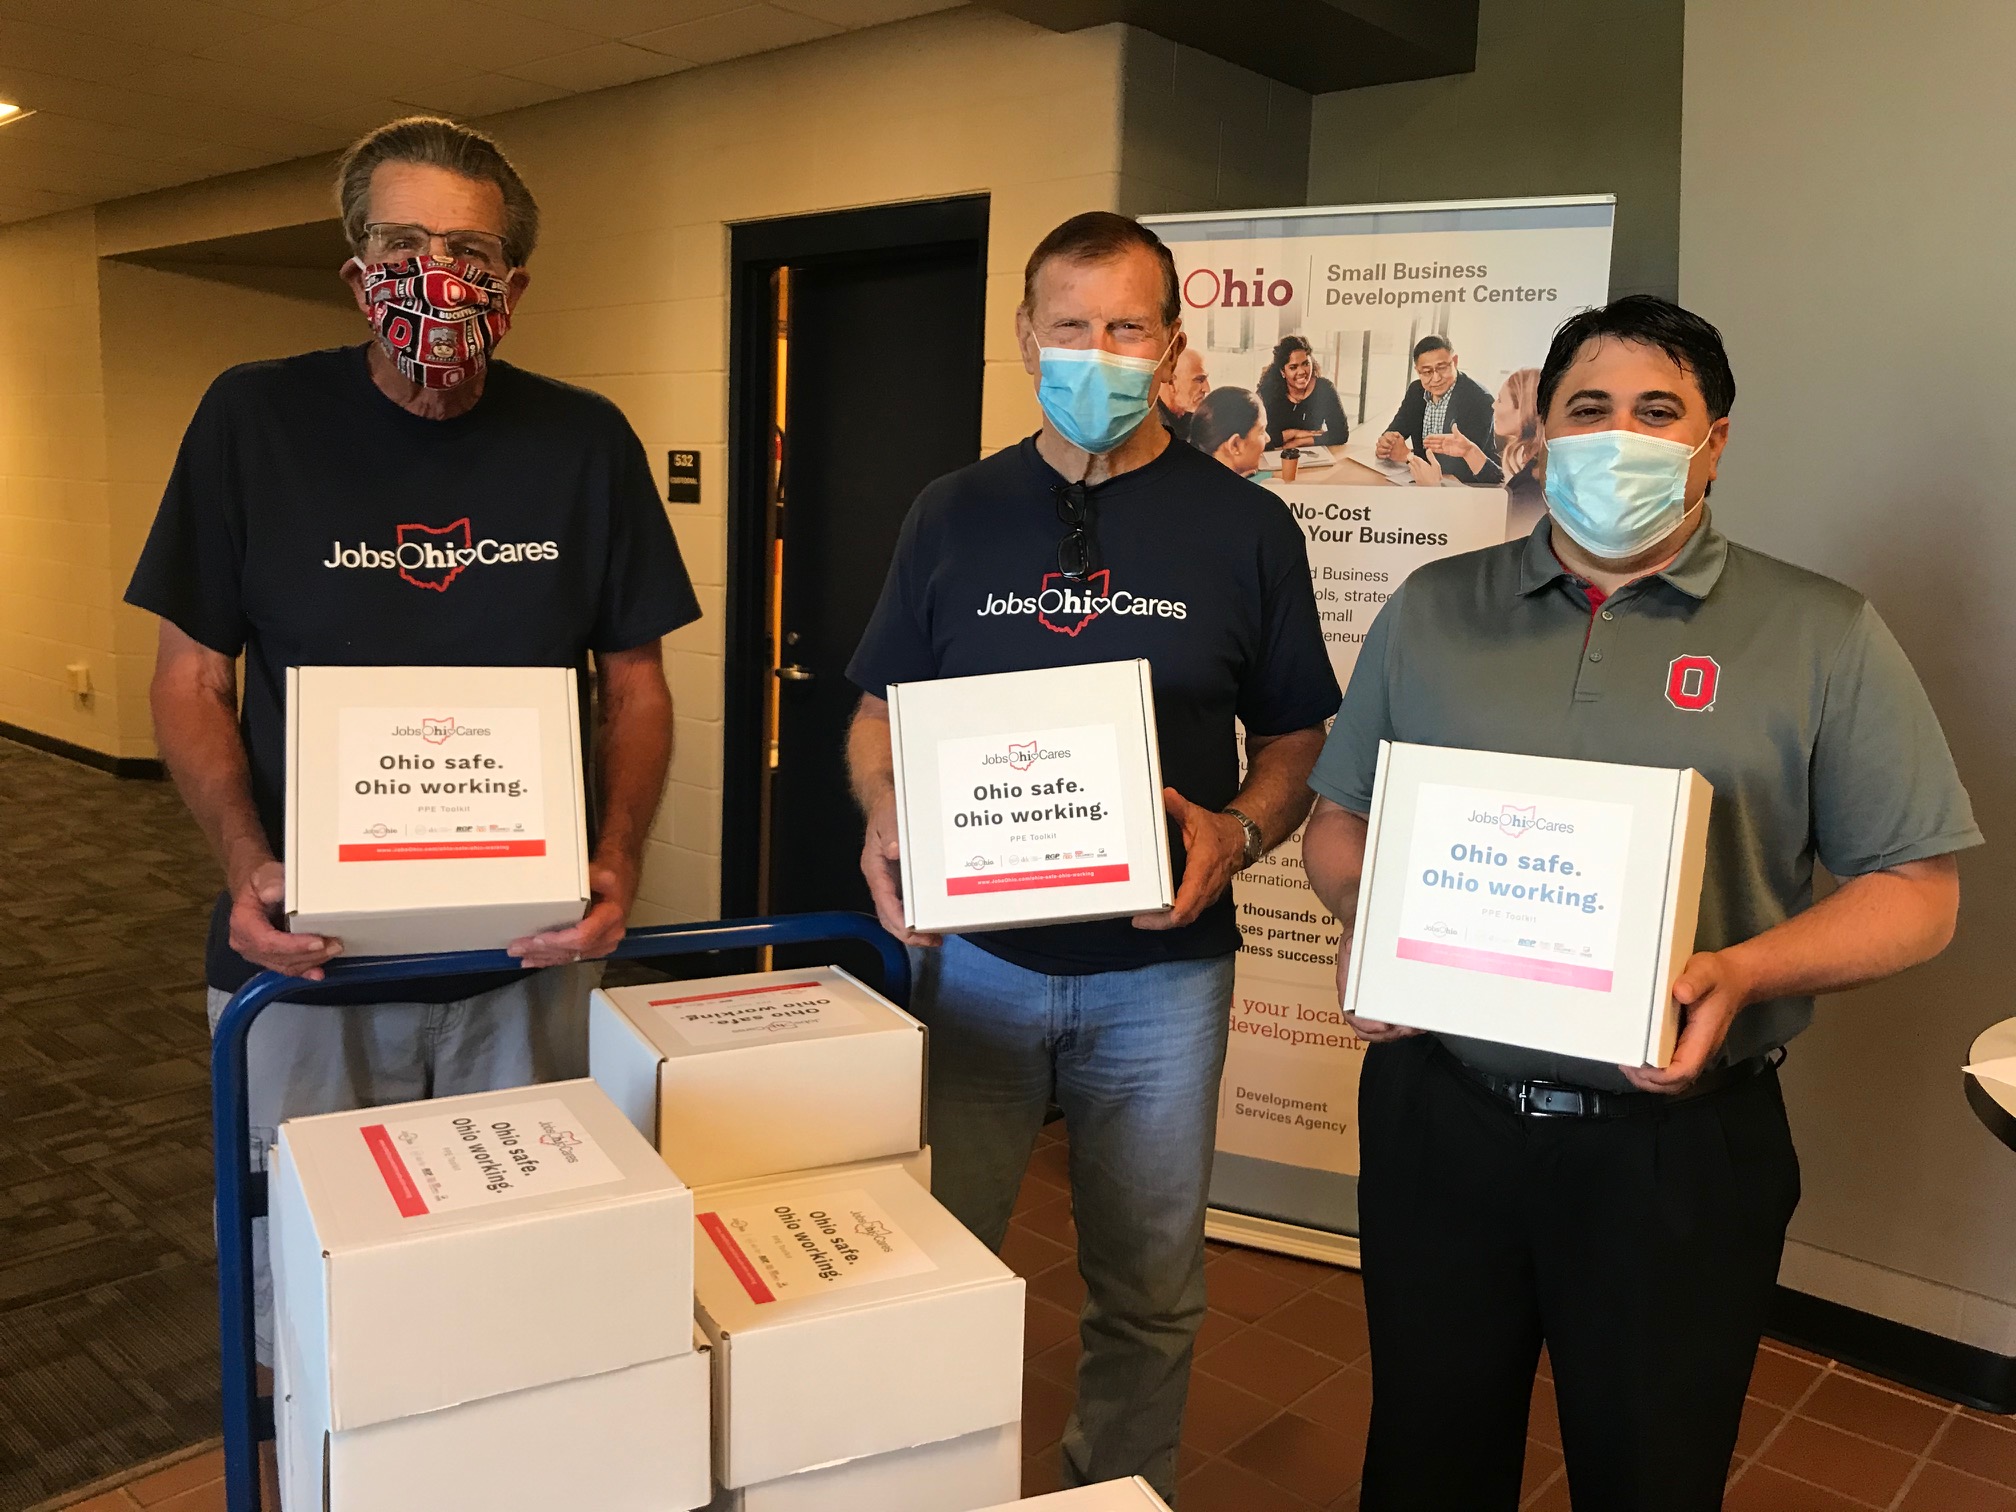 OhioSE Partners with JobsOhio to Distribute PPE Toolkits to Regional Small Businesses